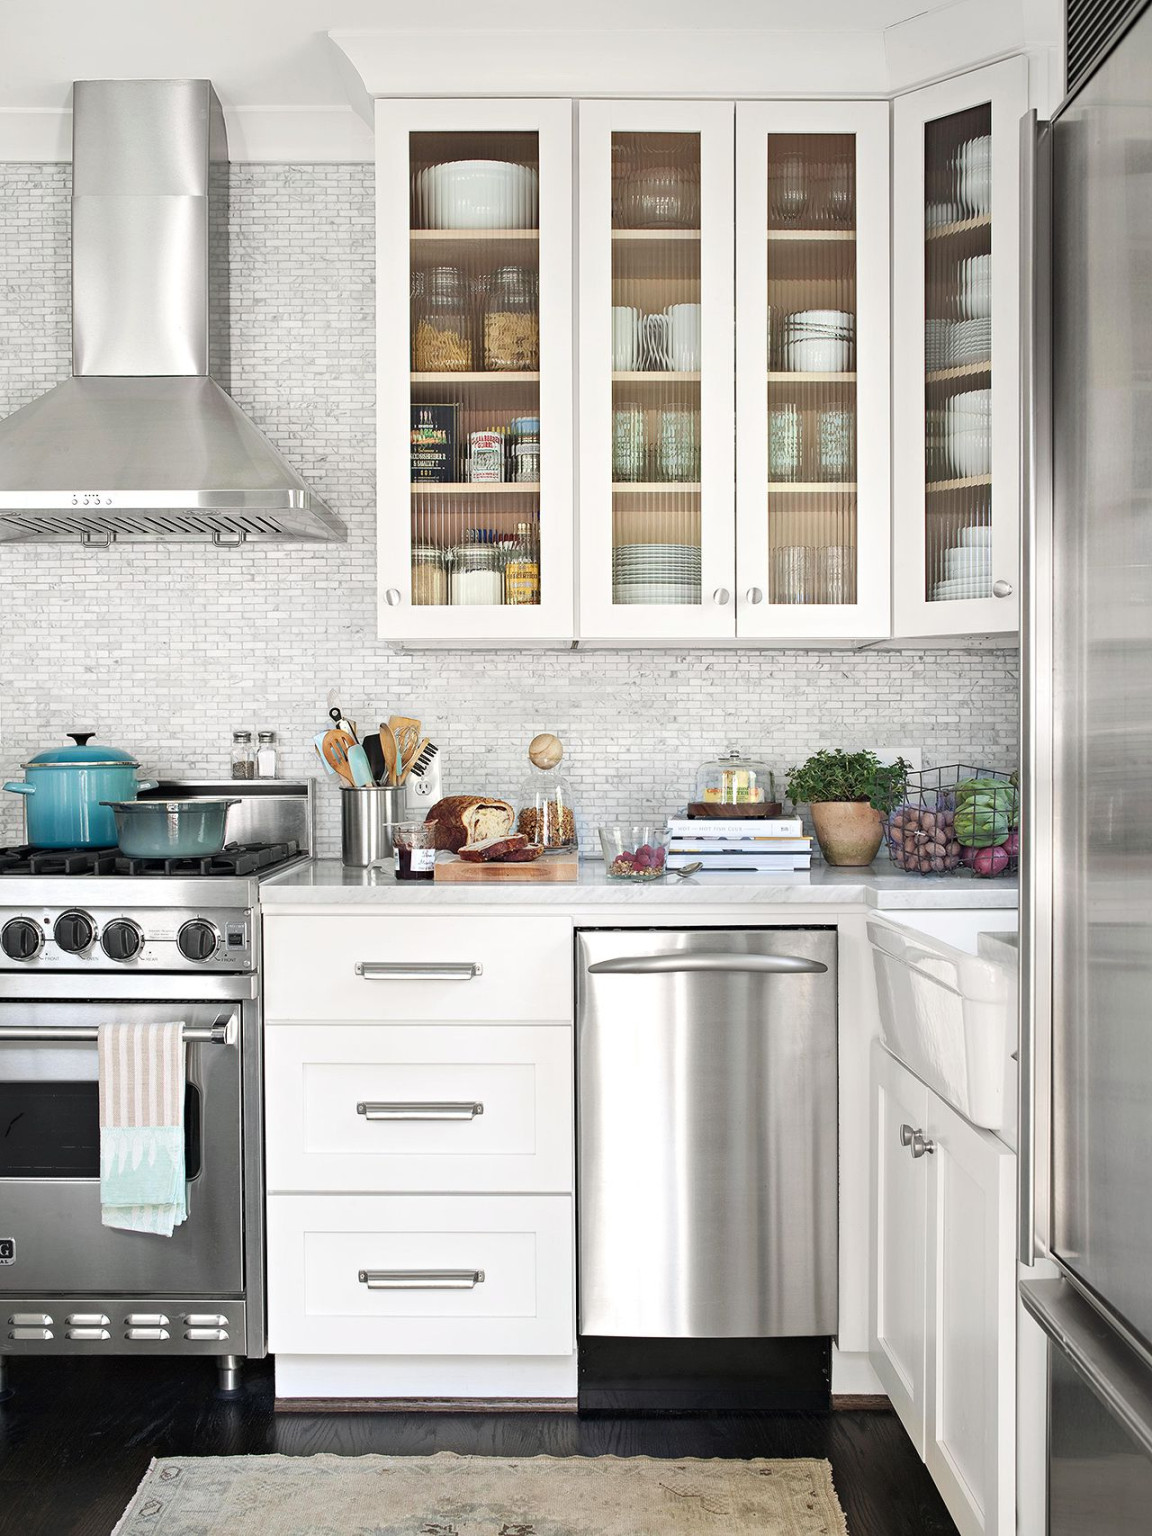 Update the Look of Your Kitchen with These DIY Glass Door Cabinets